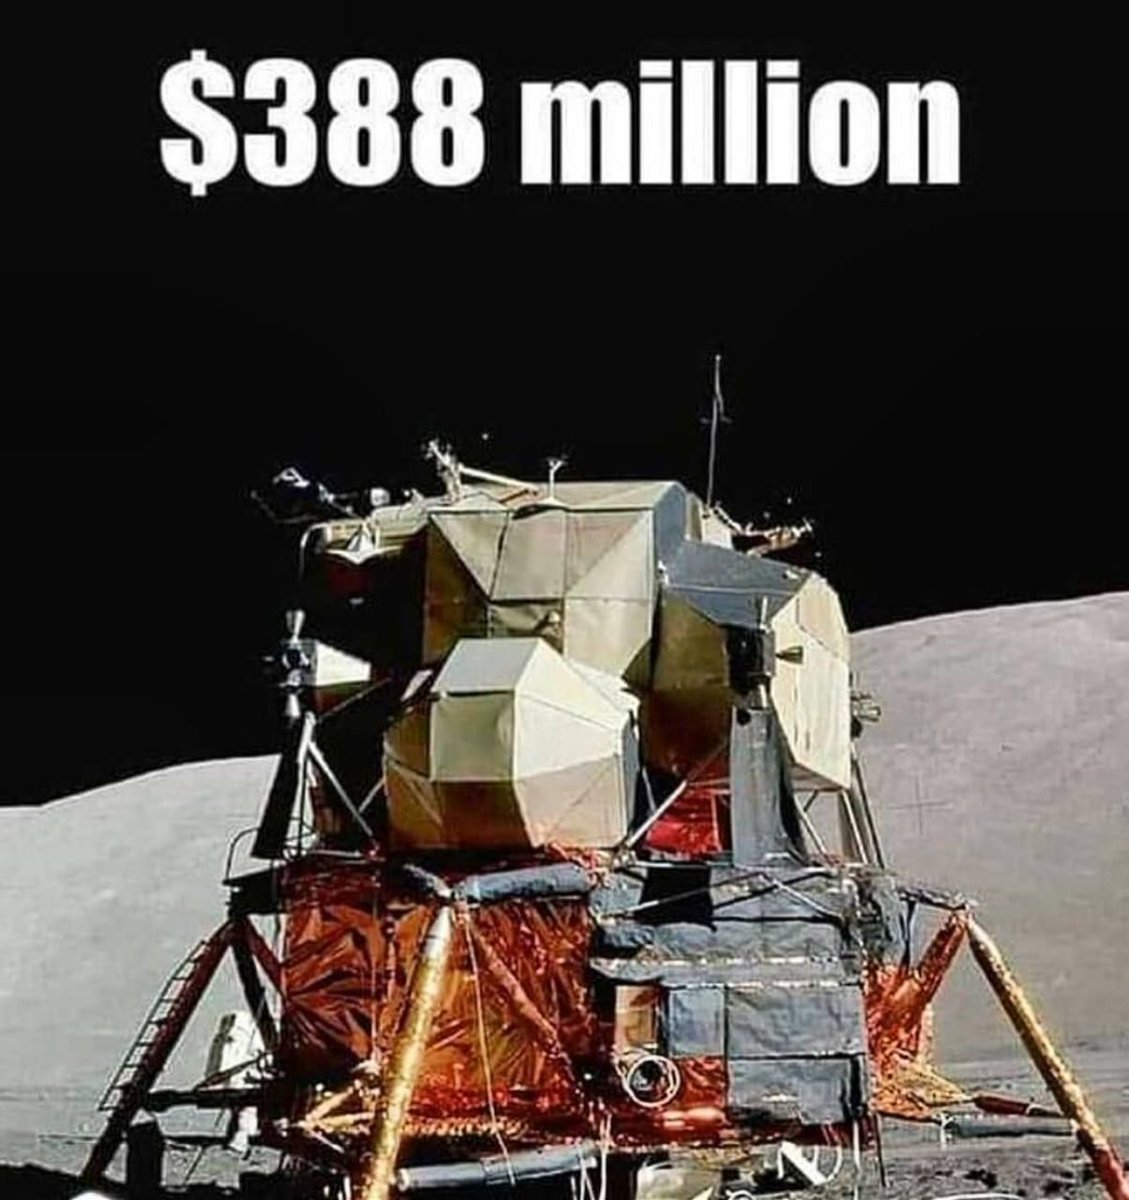 This is what they used to land on the moon. Mythbusters would make this look more believable than nasa.